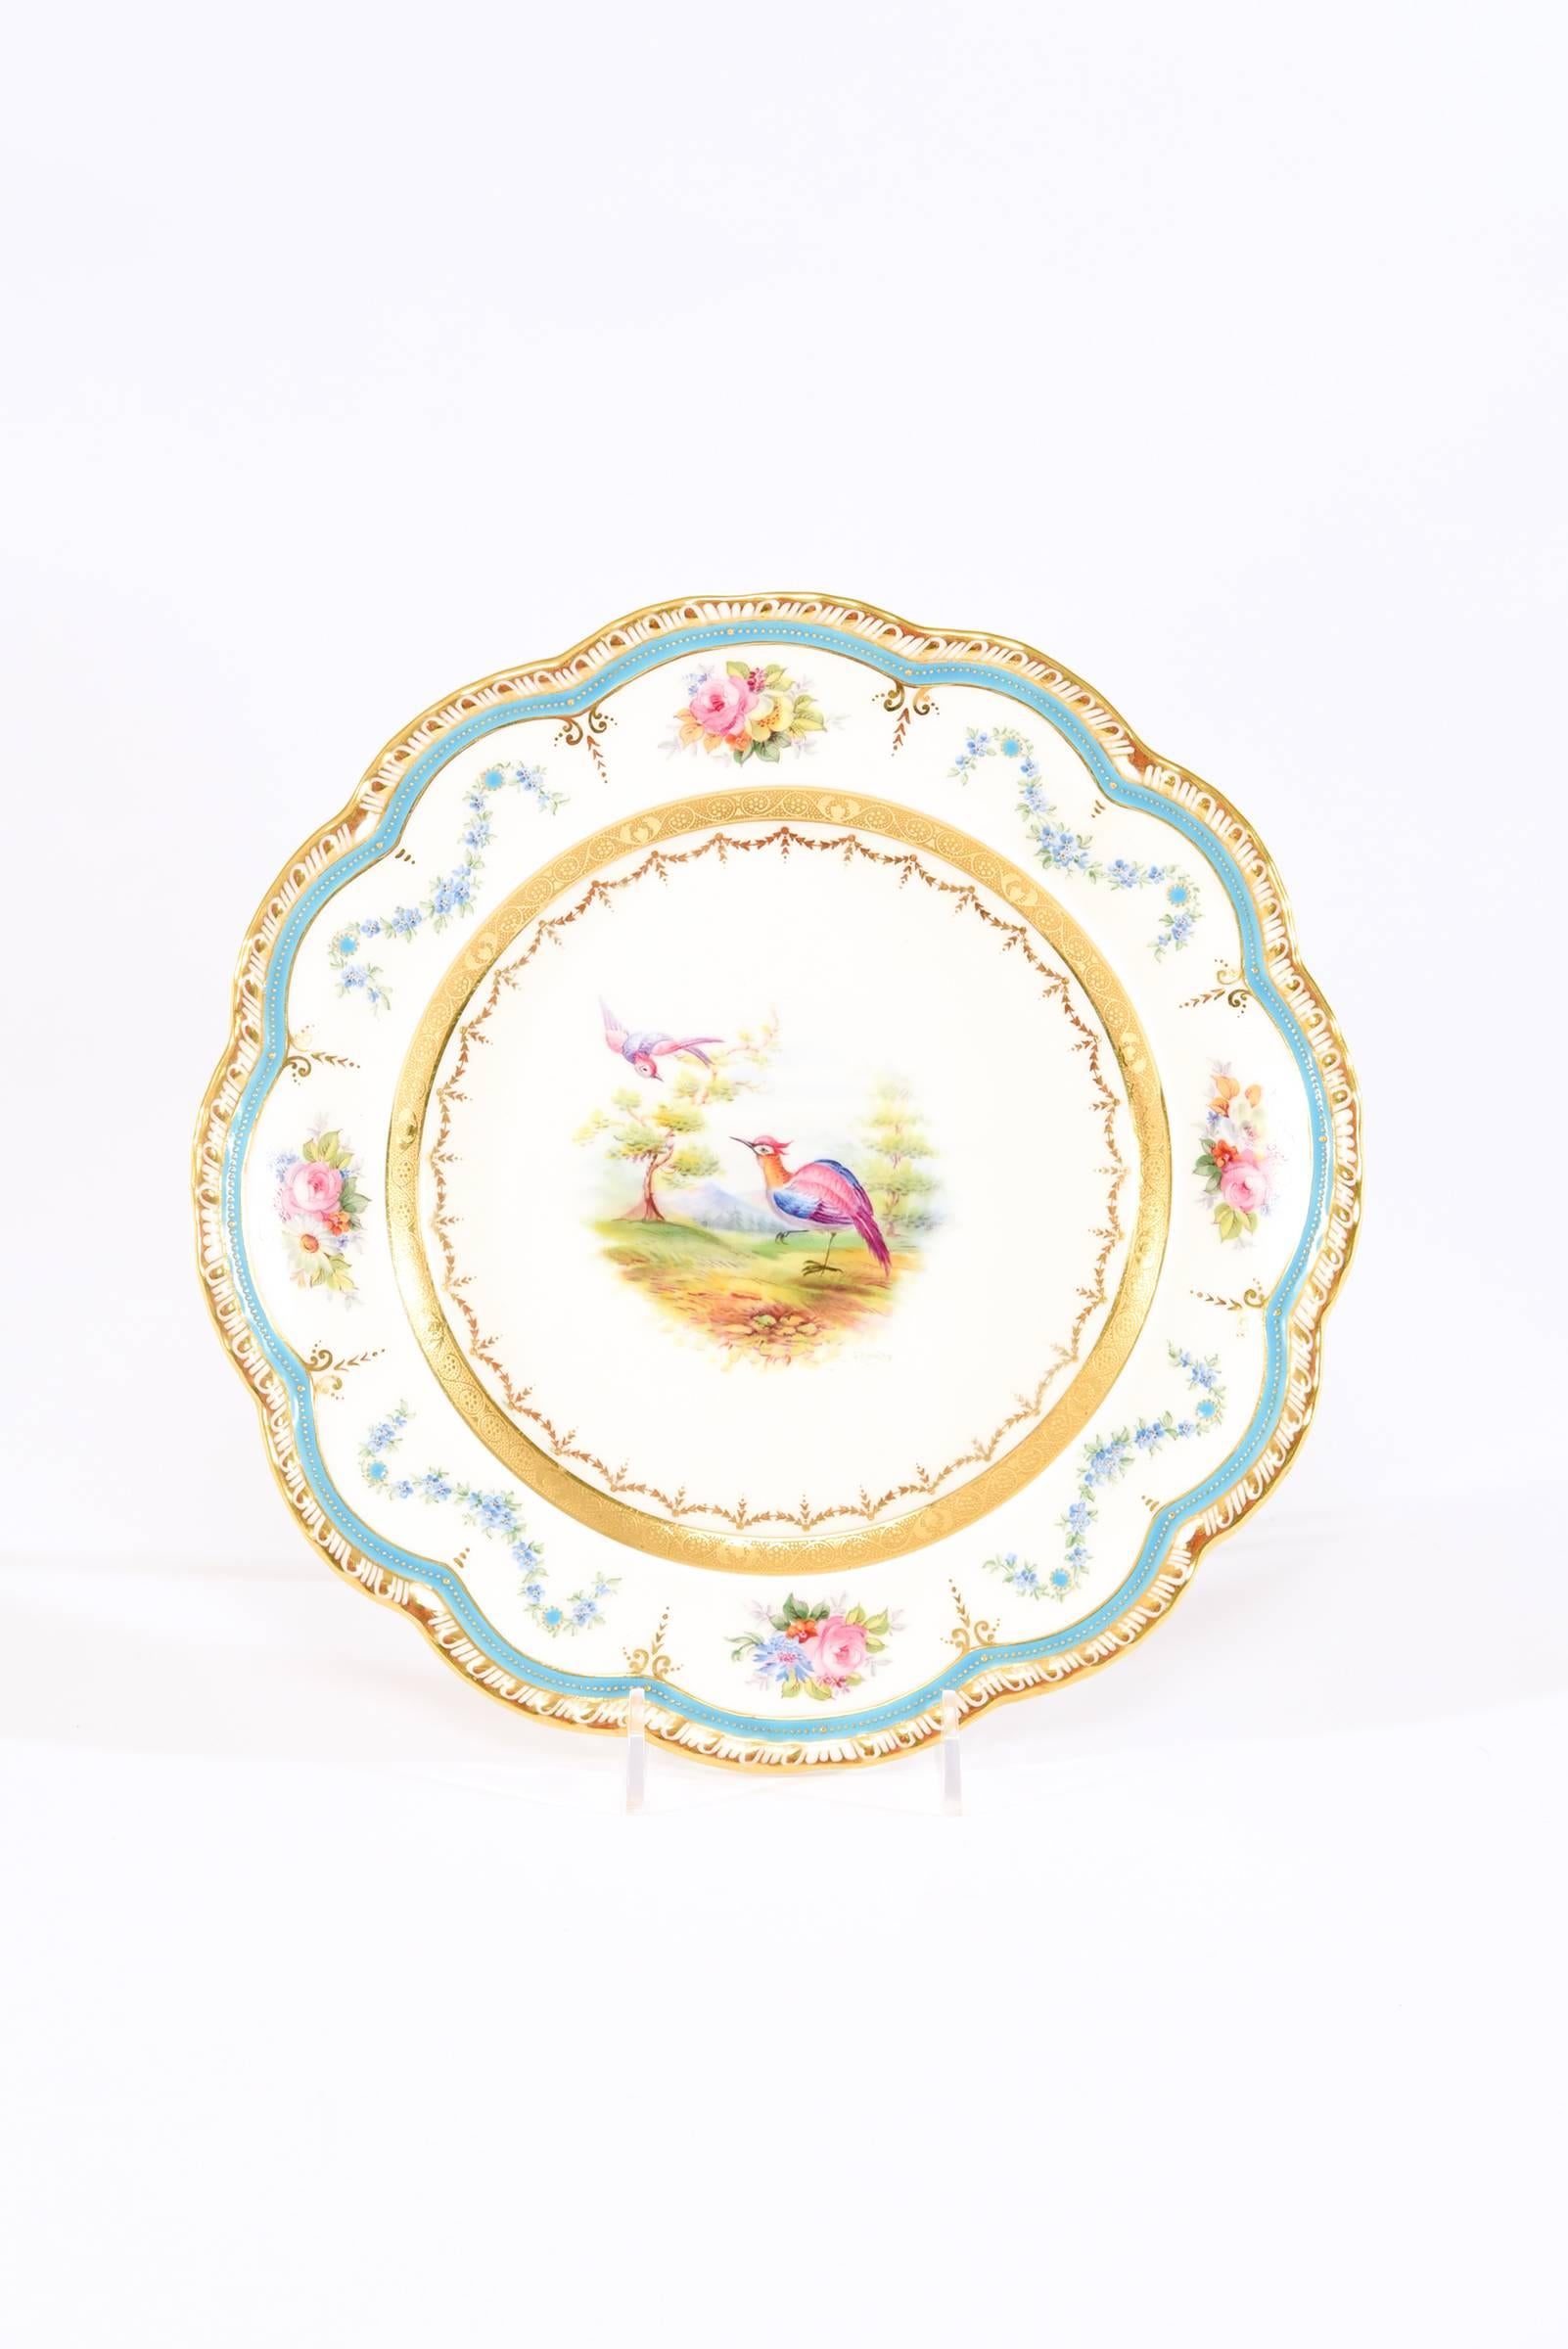 12 Cauldon Hand Painted Signed G Rowley Ornate Exotic Bird & Floral Desserts In Good Condition For Sale In Great Barrington, MA